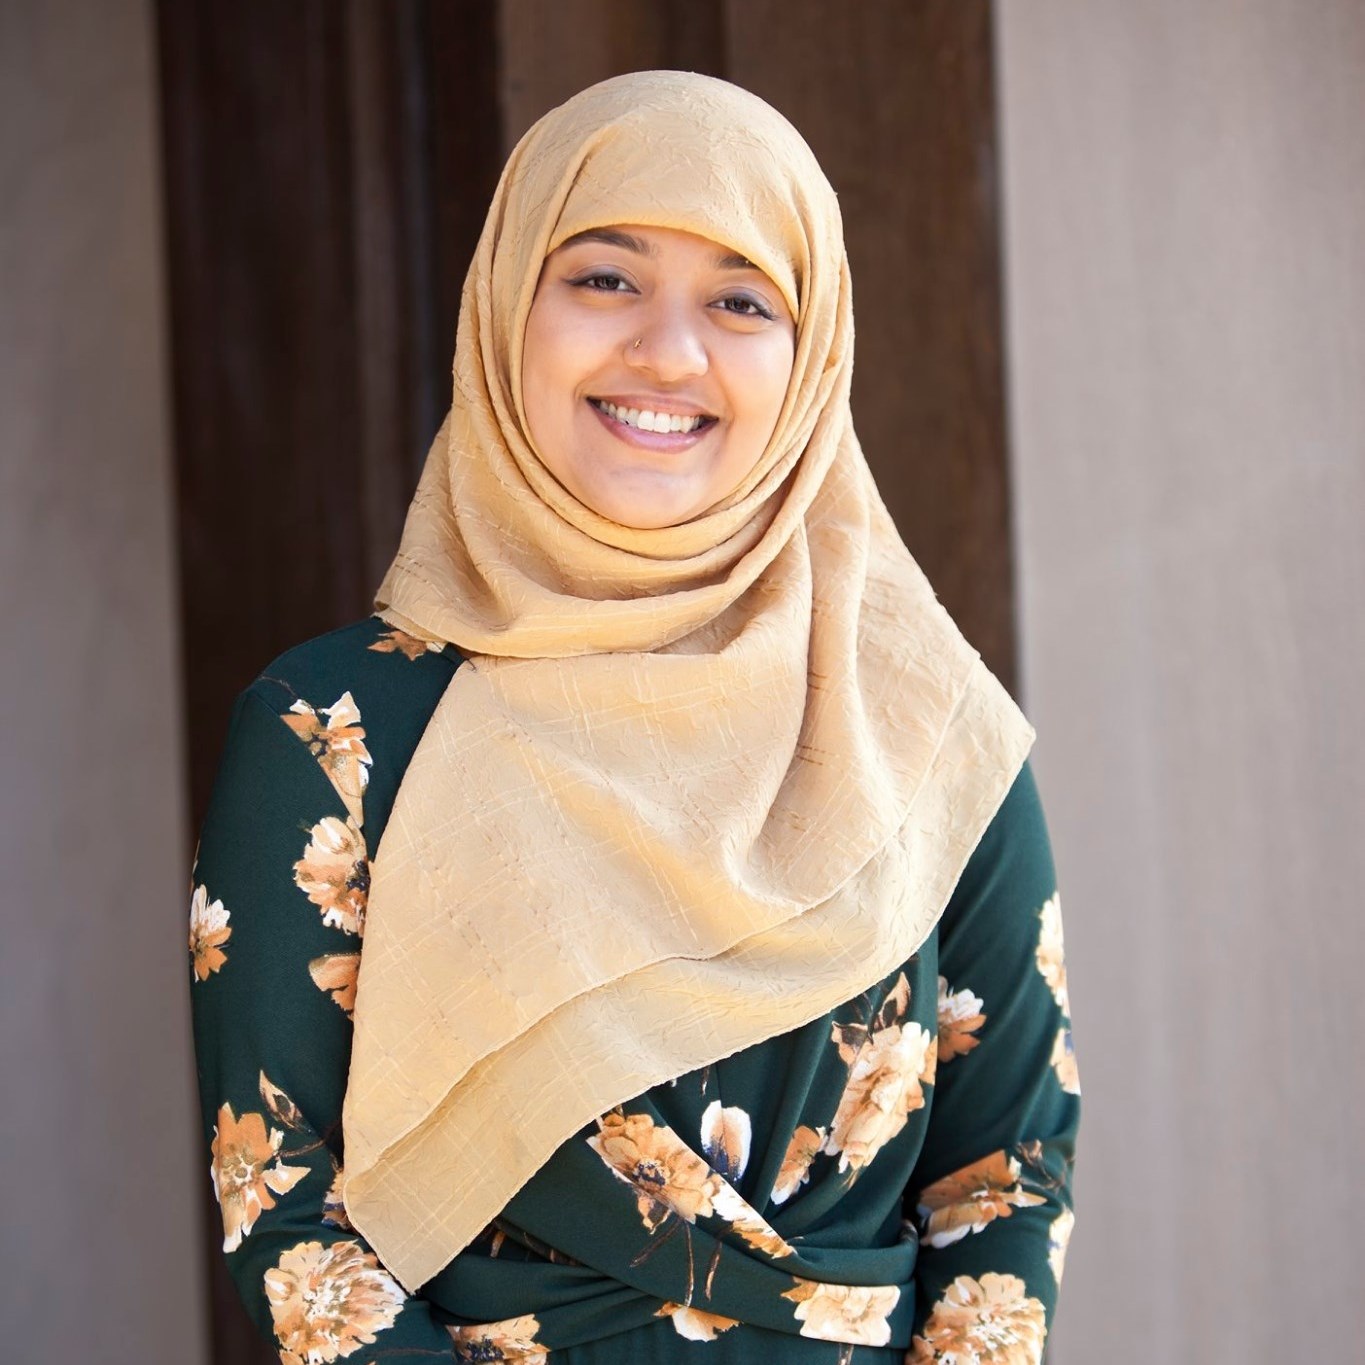 Nusaiba Chowdhury posing for a photo for her Schweitzer fellowship program where she hopes to provide refugee assistance to those in need.